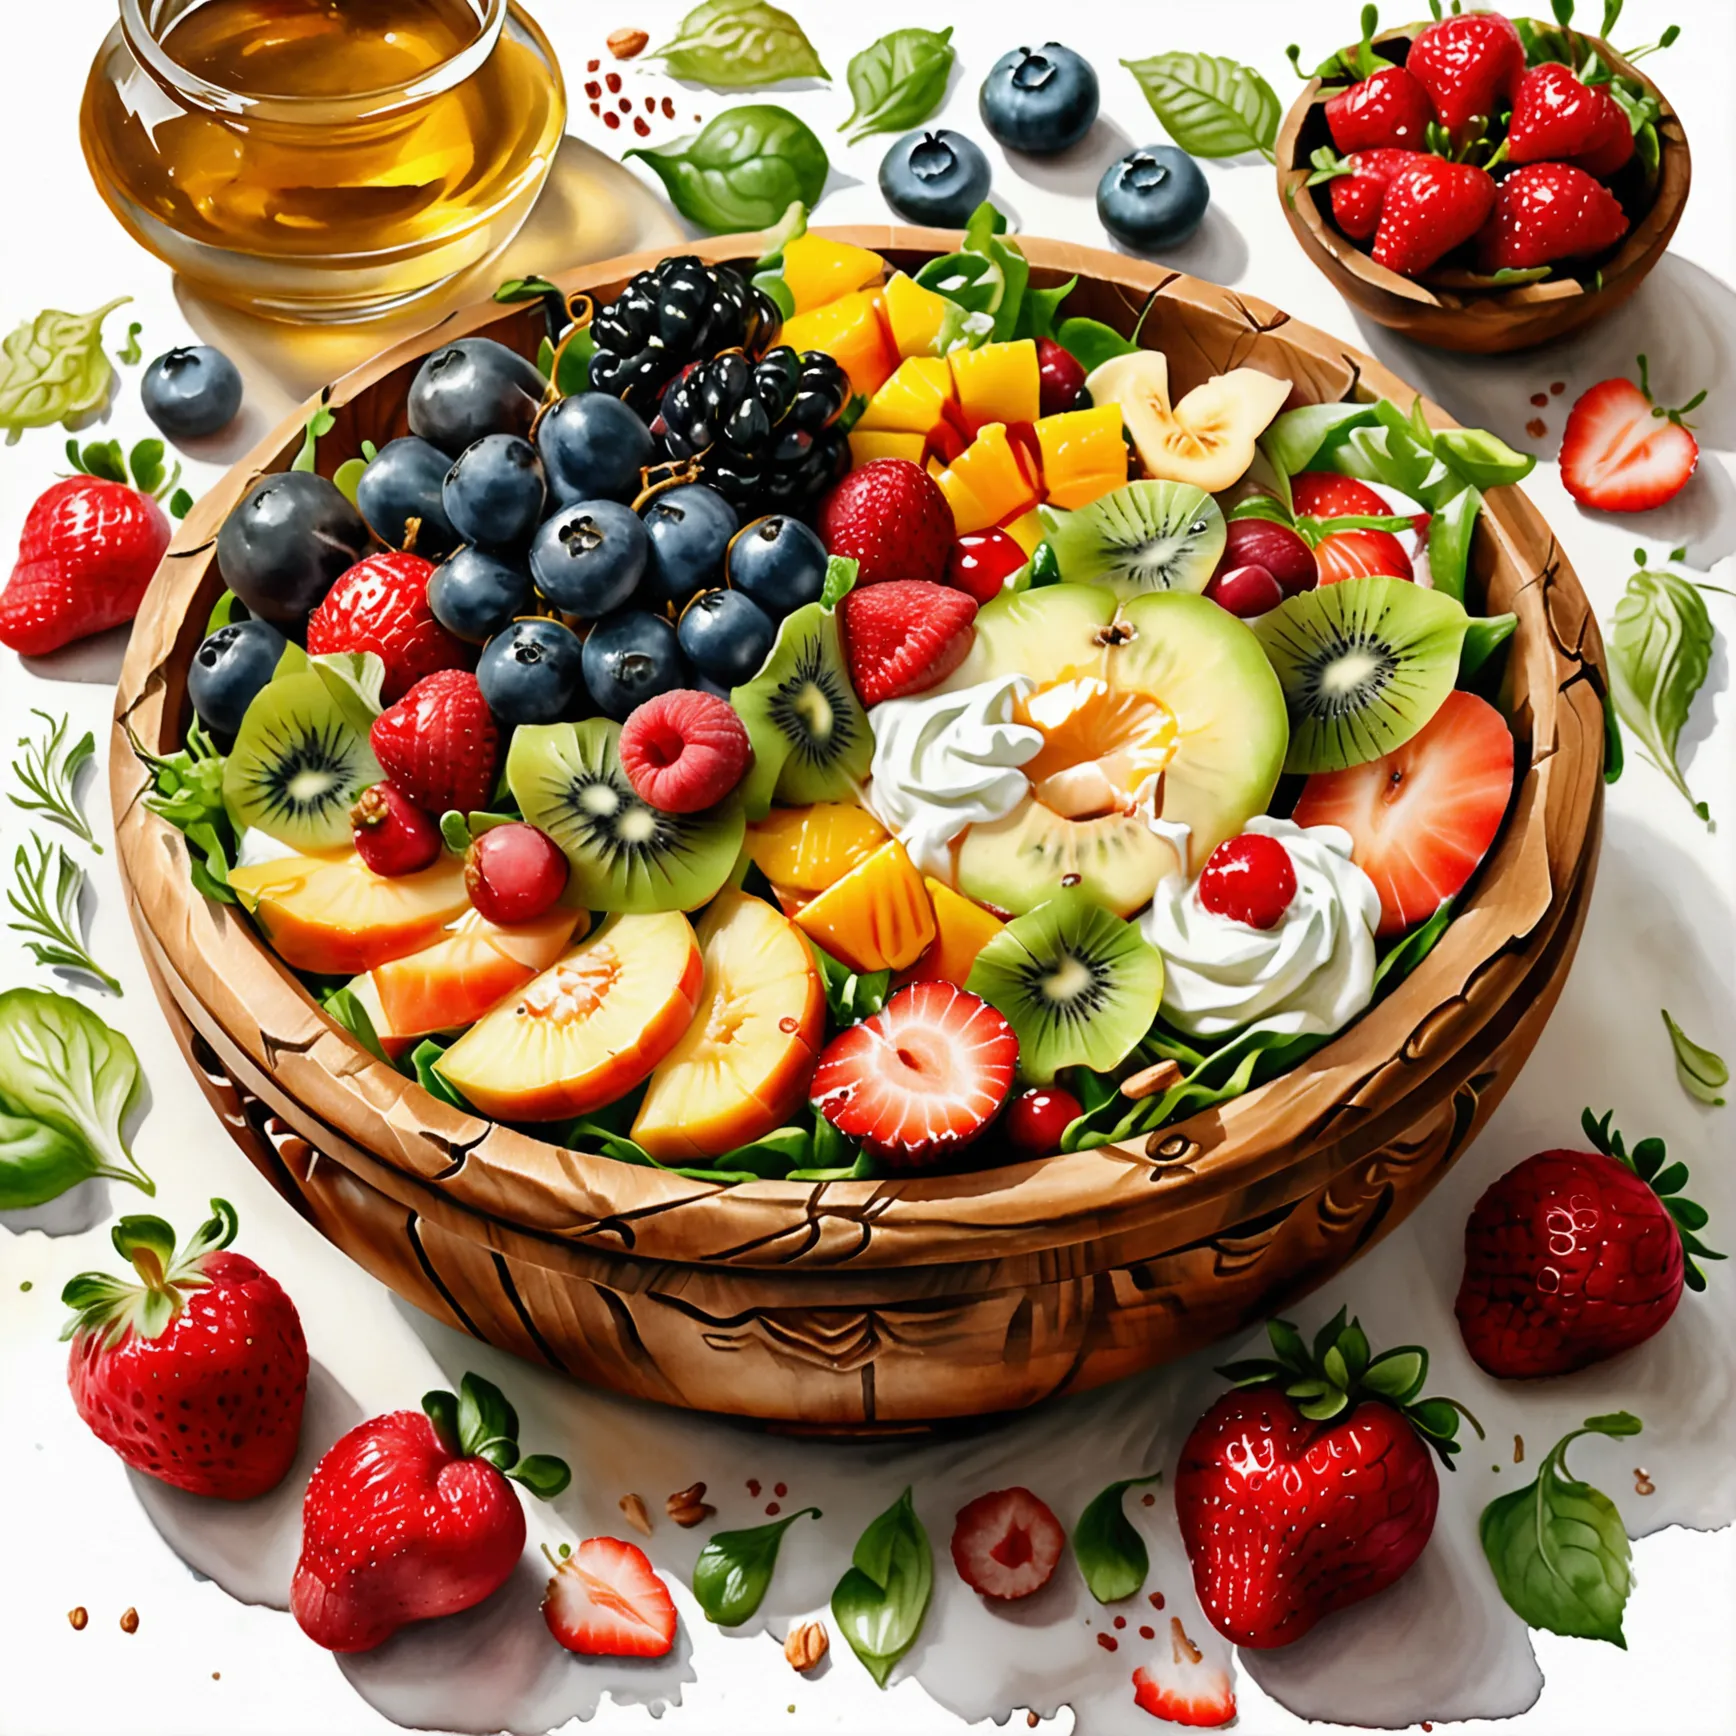 There is bowl of salad made of different fruit , fresh and creamy, with white cream and mayonnaise, served in classy medieval ag...